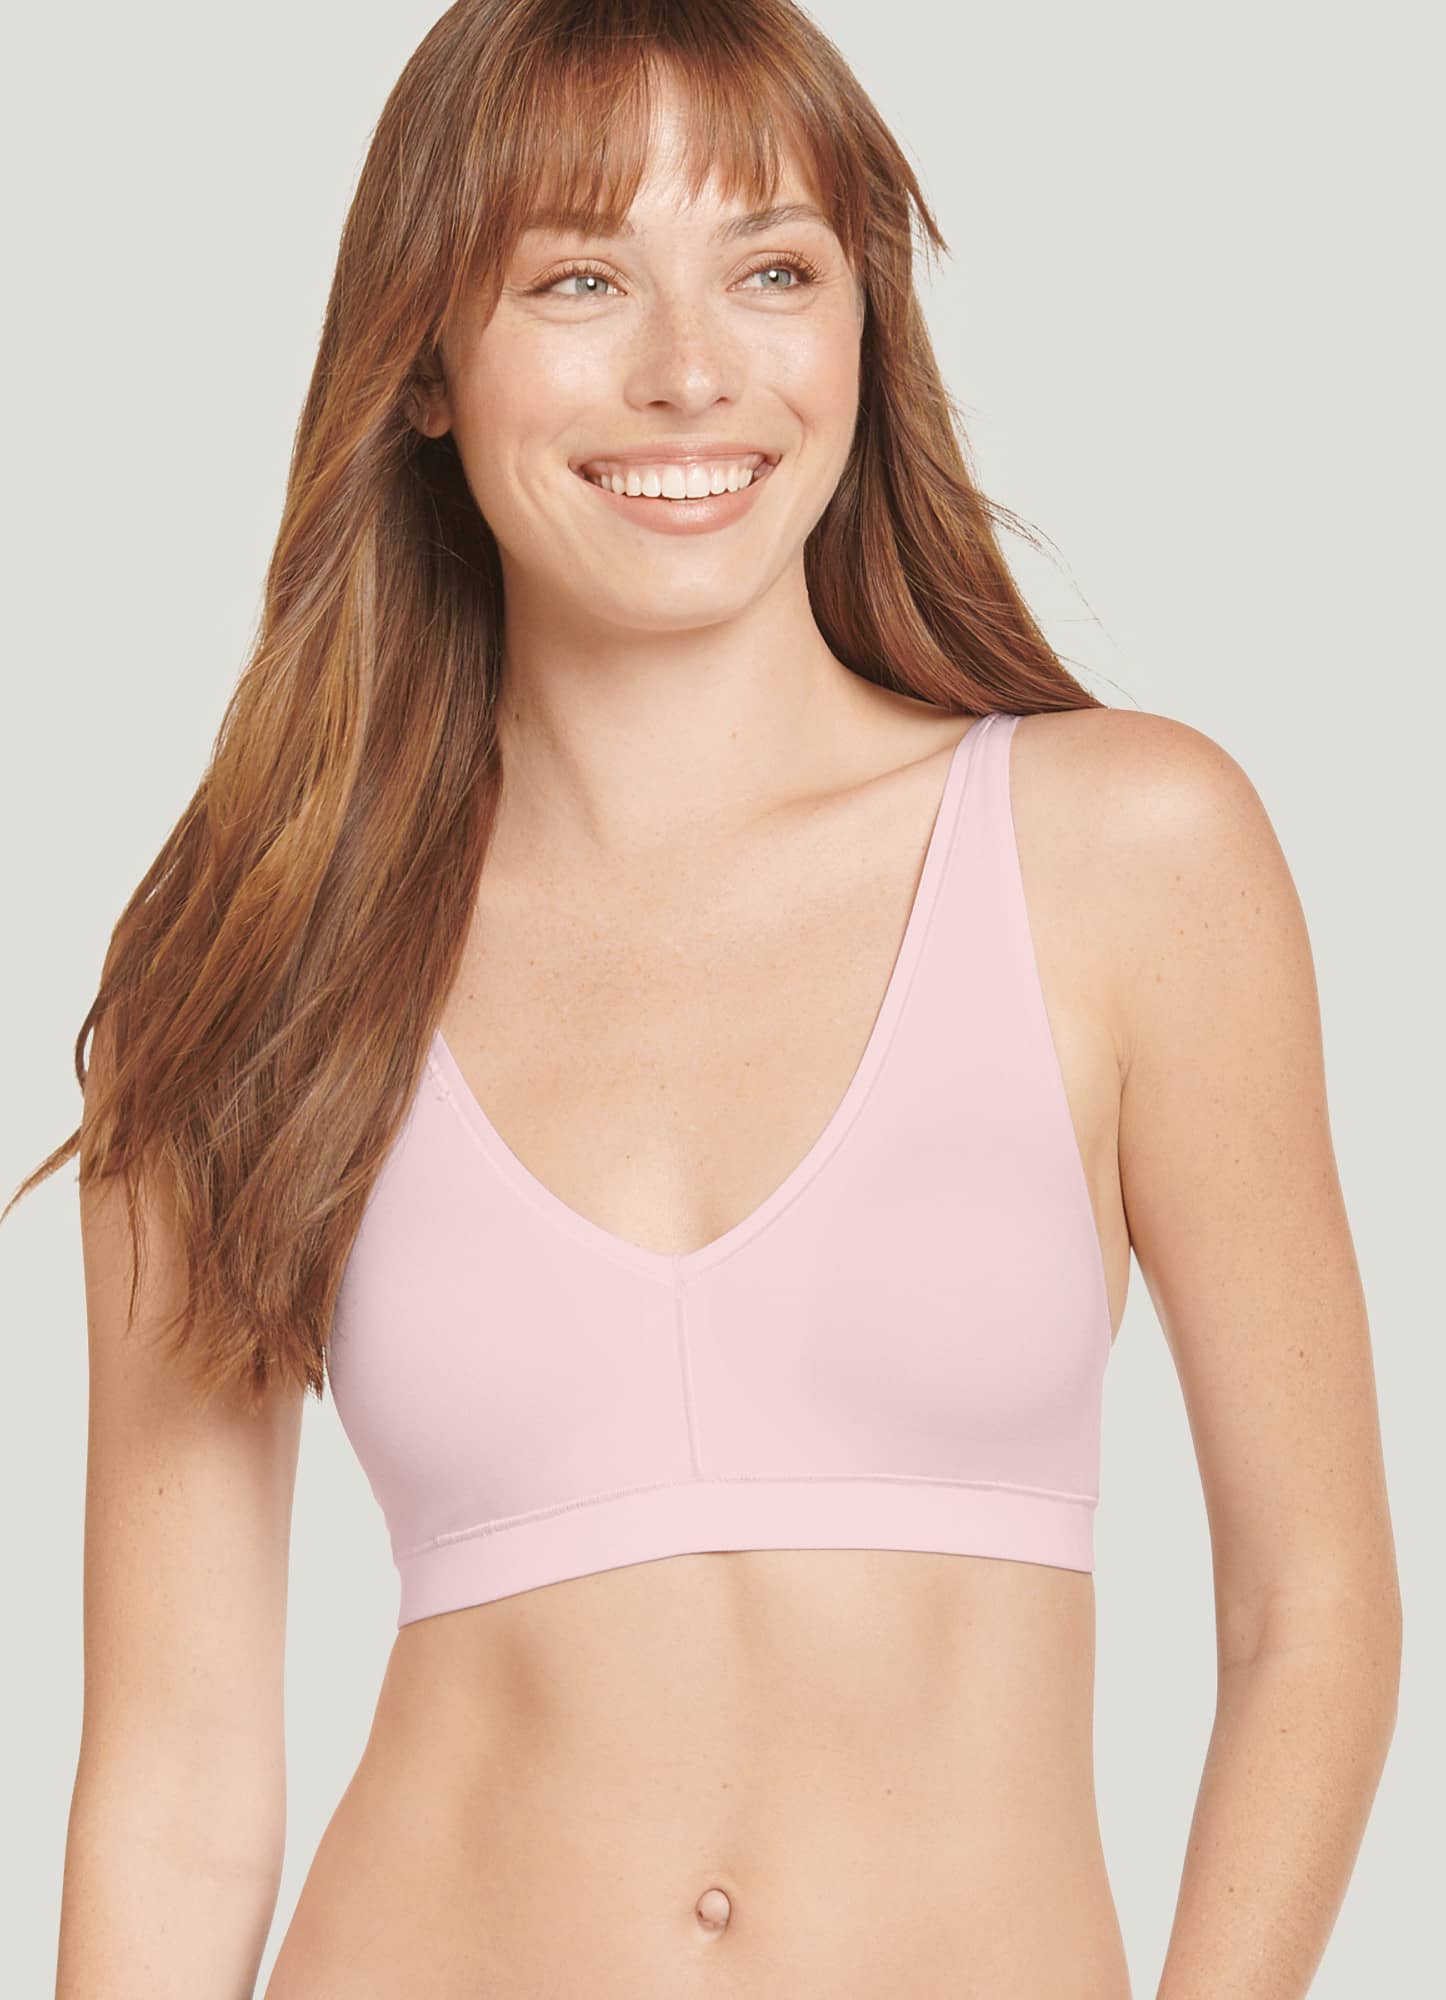 B-Smooth® Bralette, Up to Size 2XL, Style # 835575